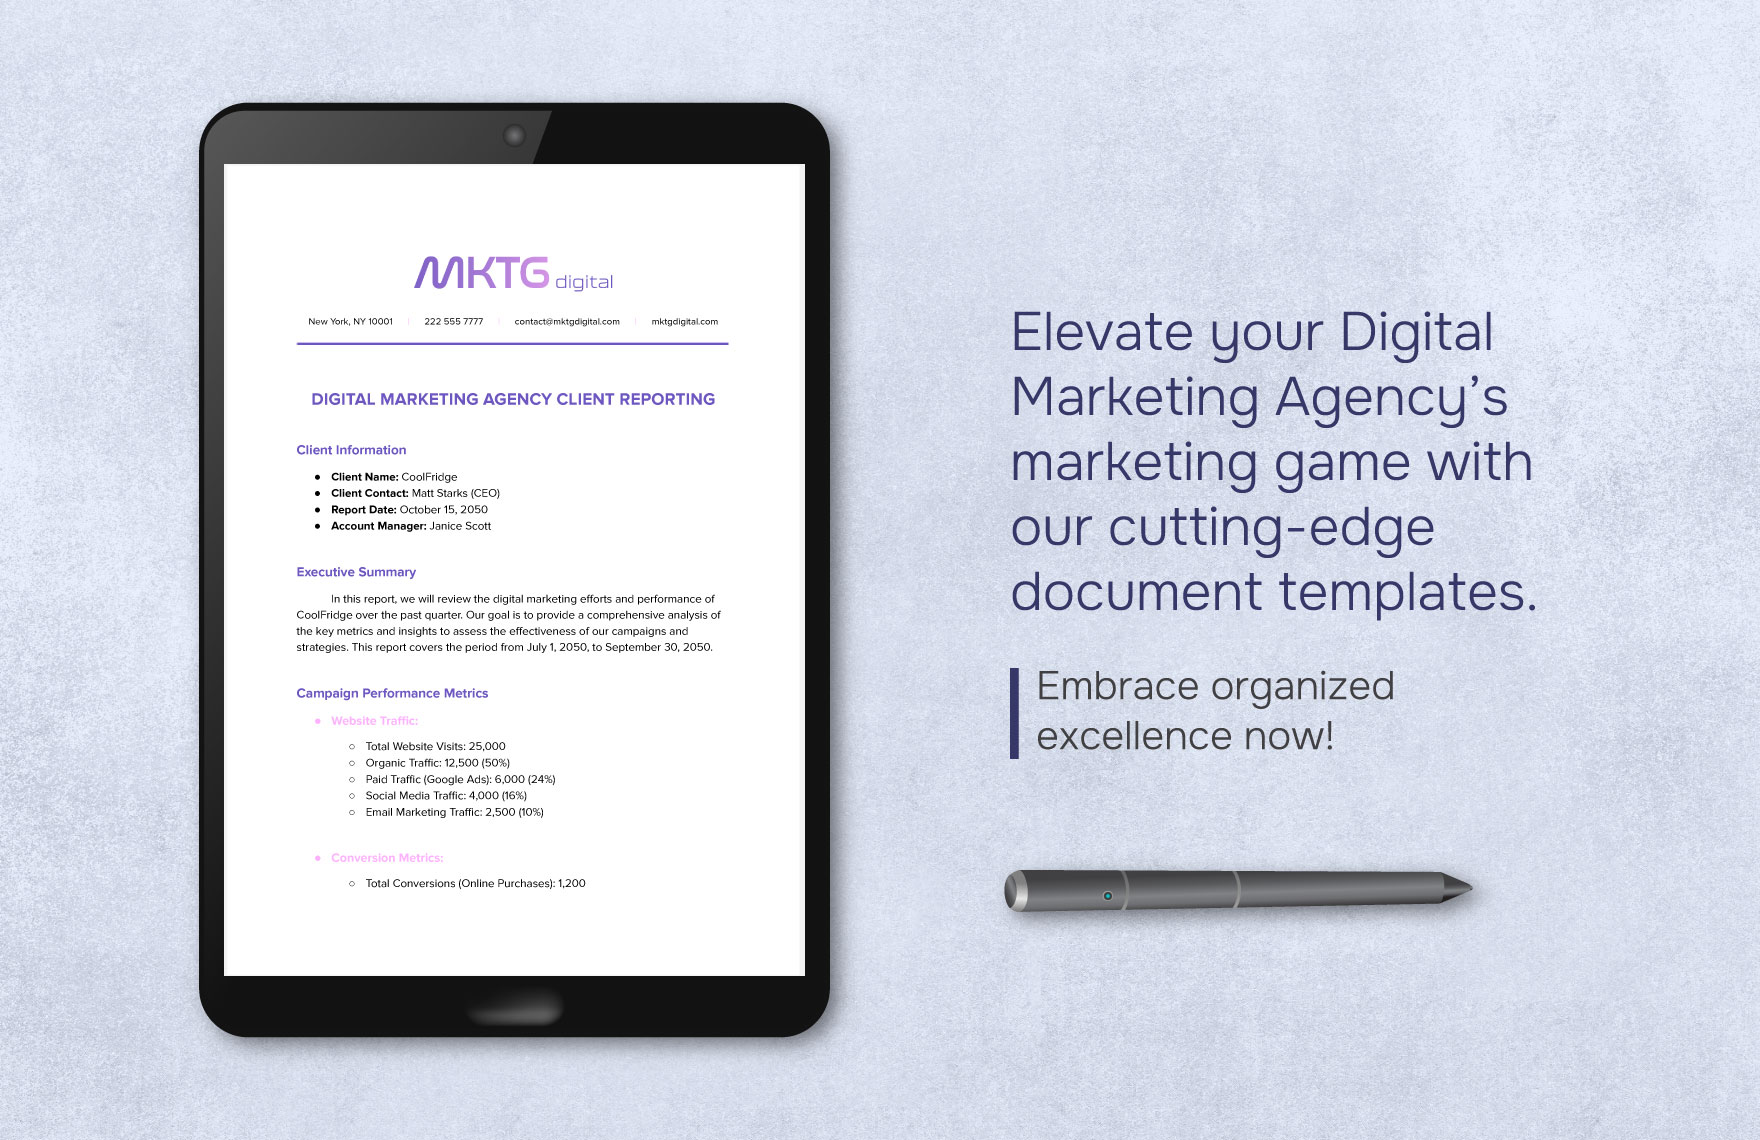 Digital Marketing Agency Client Reporting Template